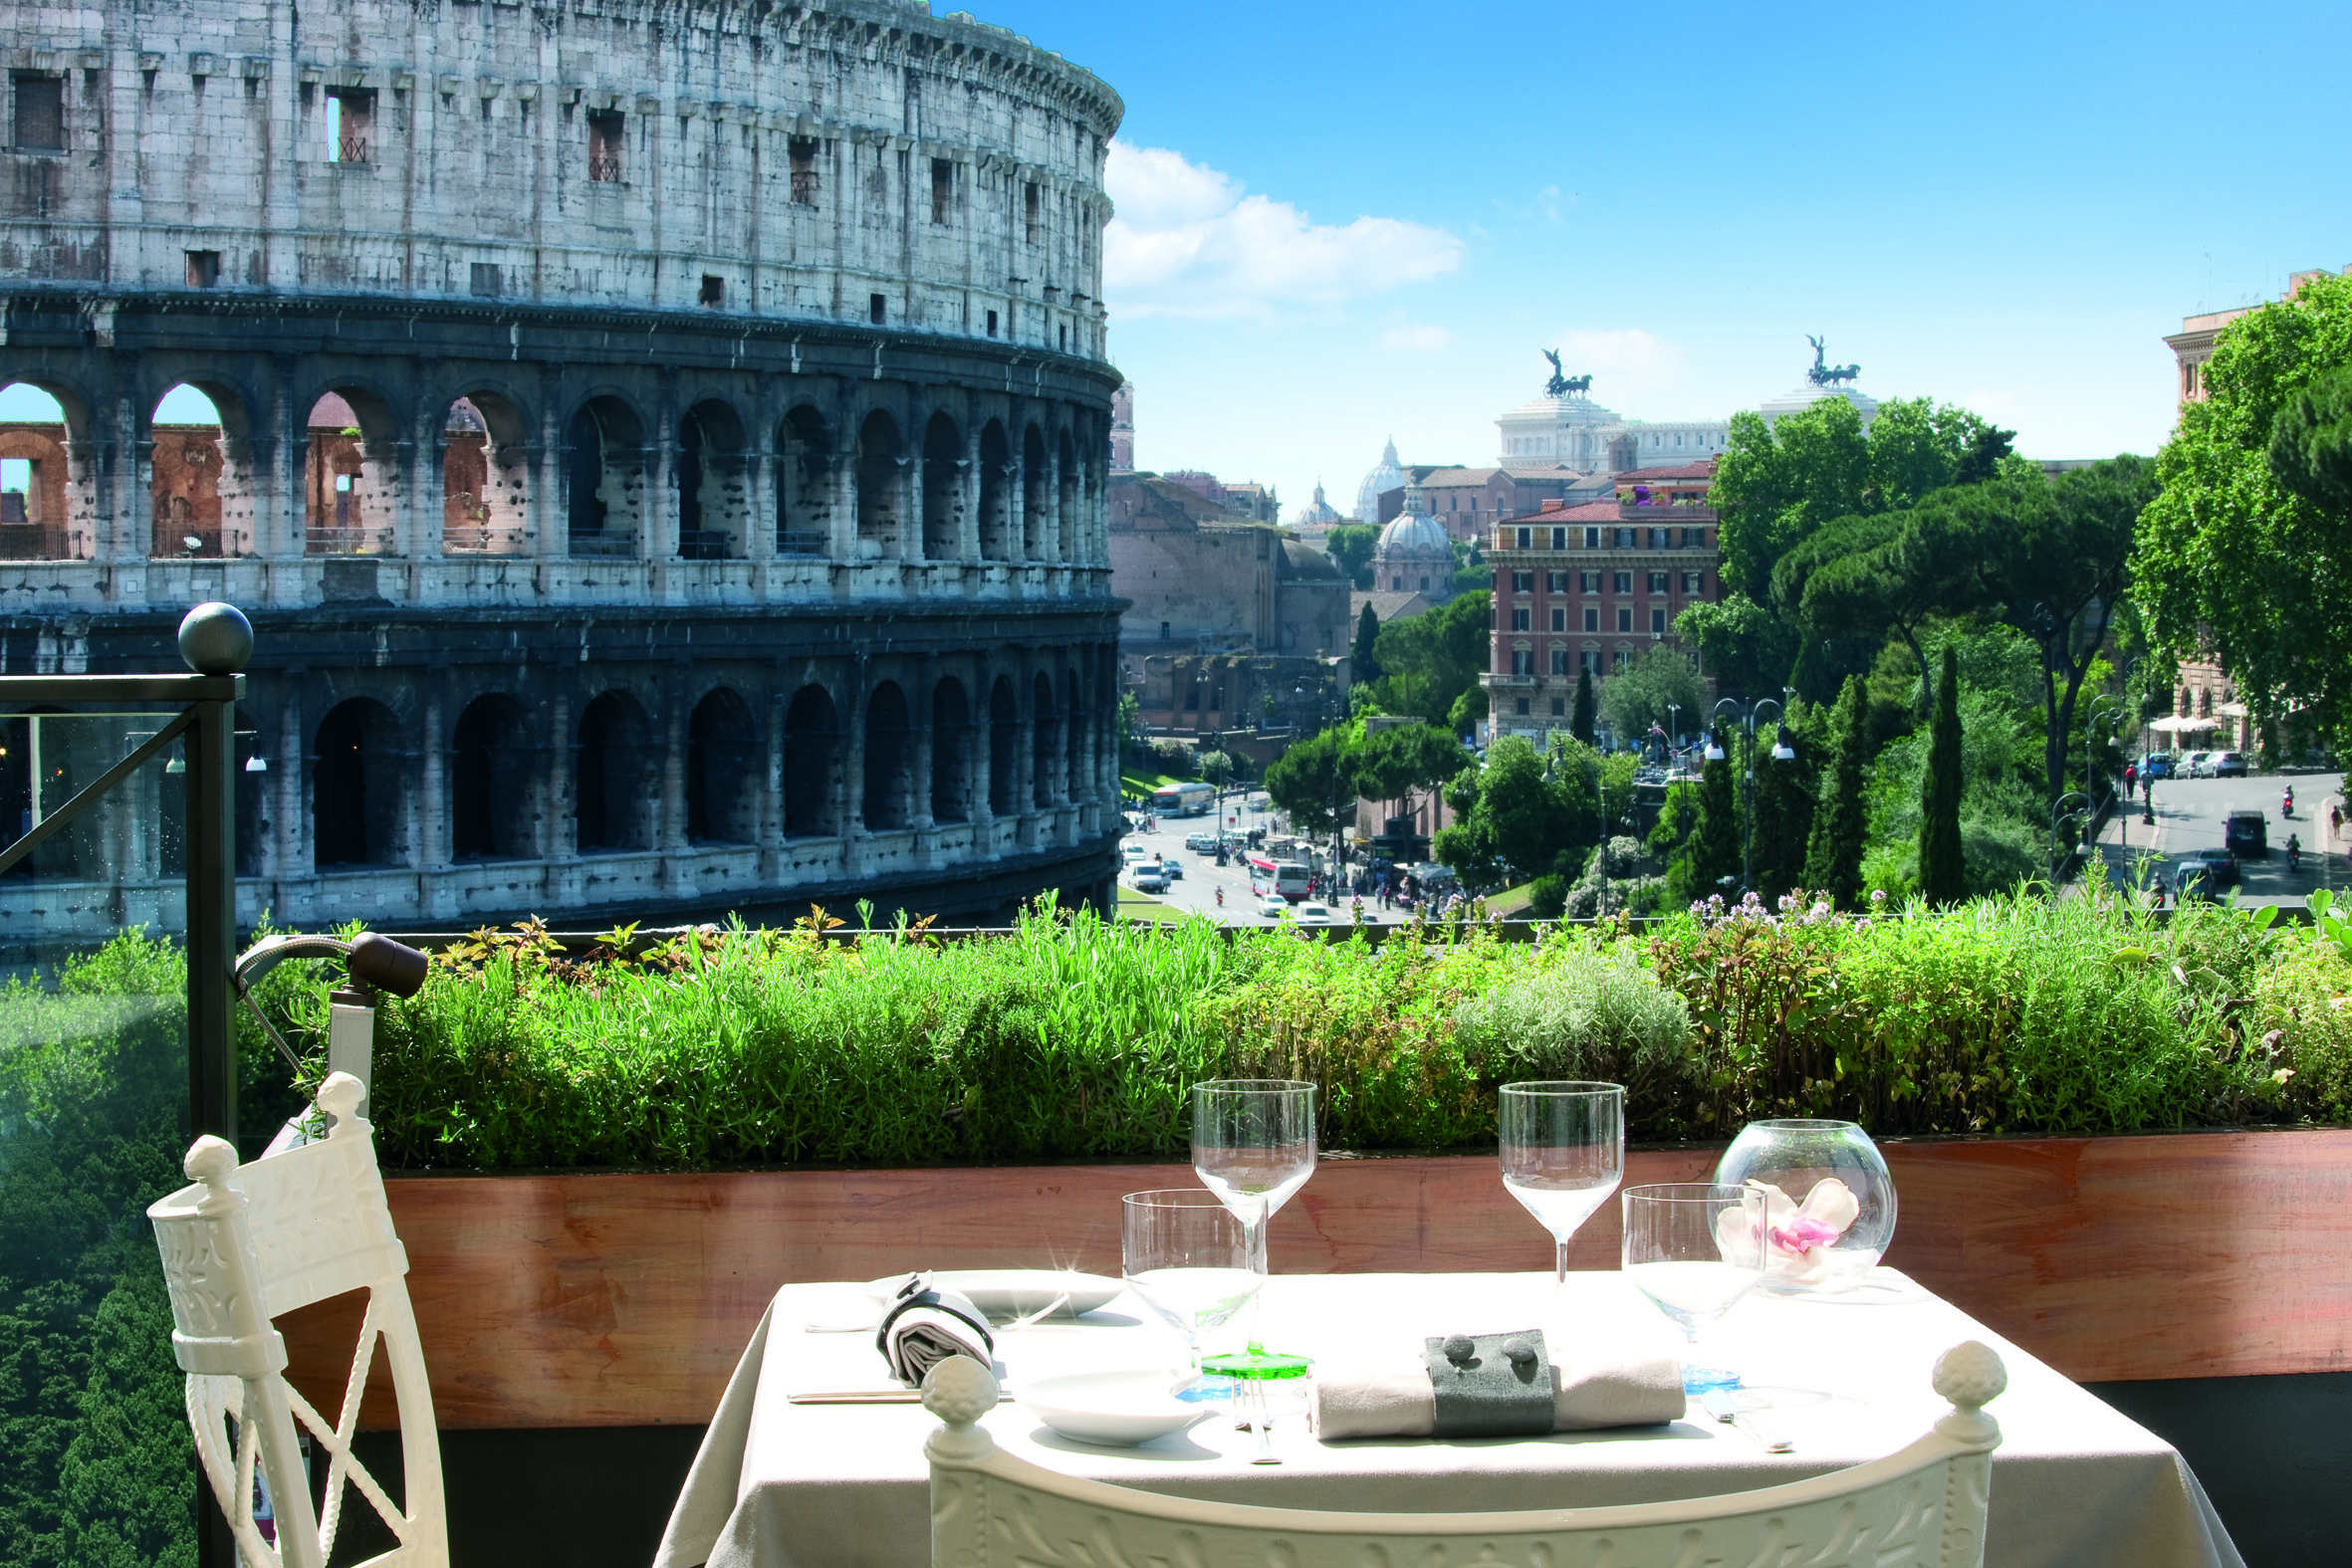 LuvC ★ Dreaming about romantic date in Rome ★ custom pic 1